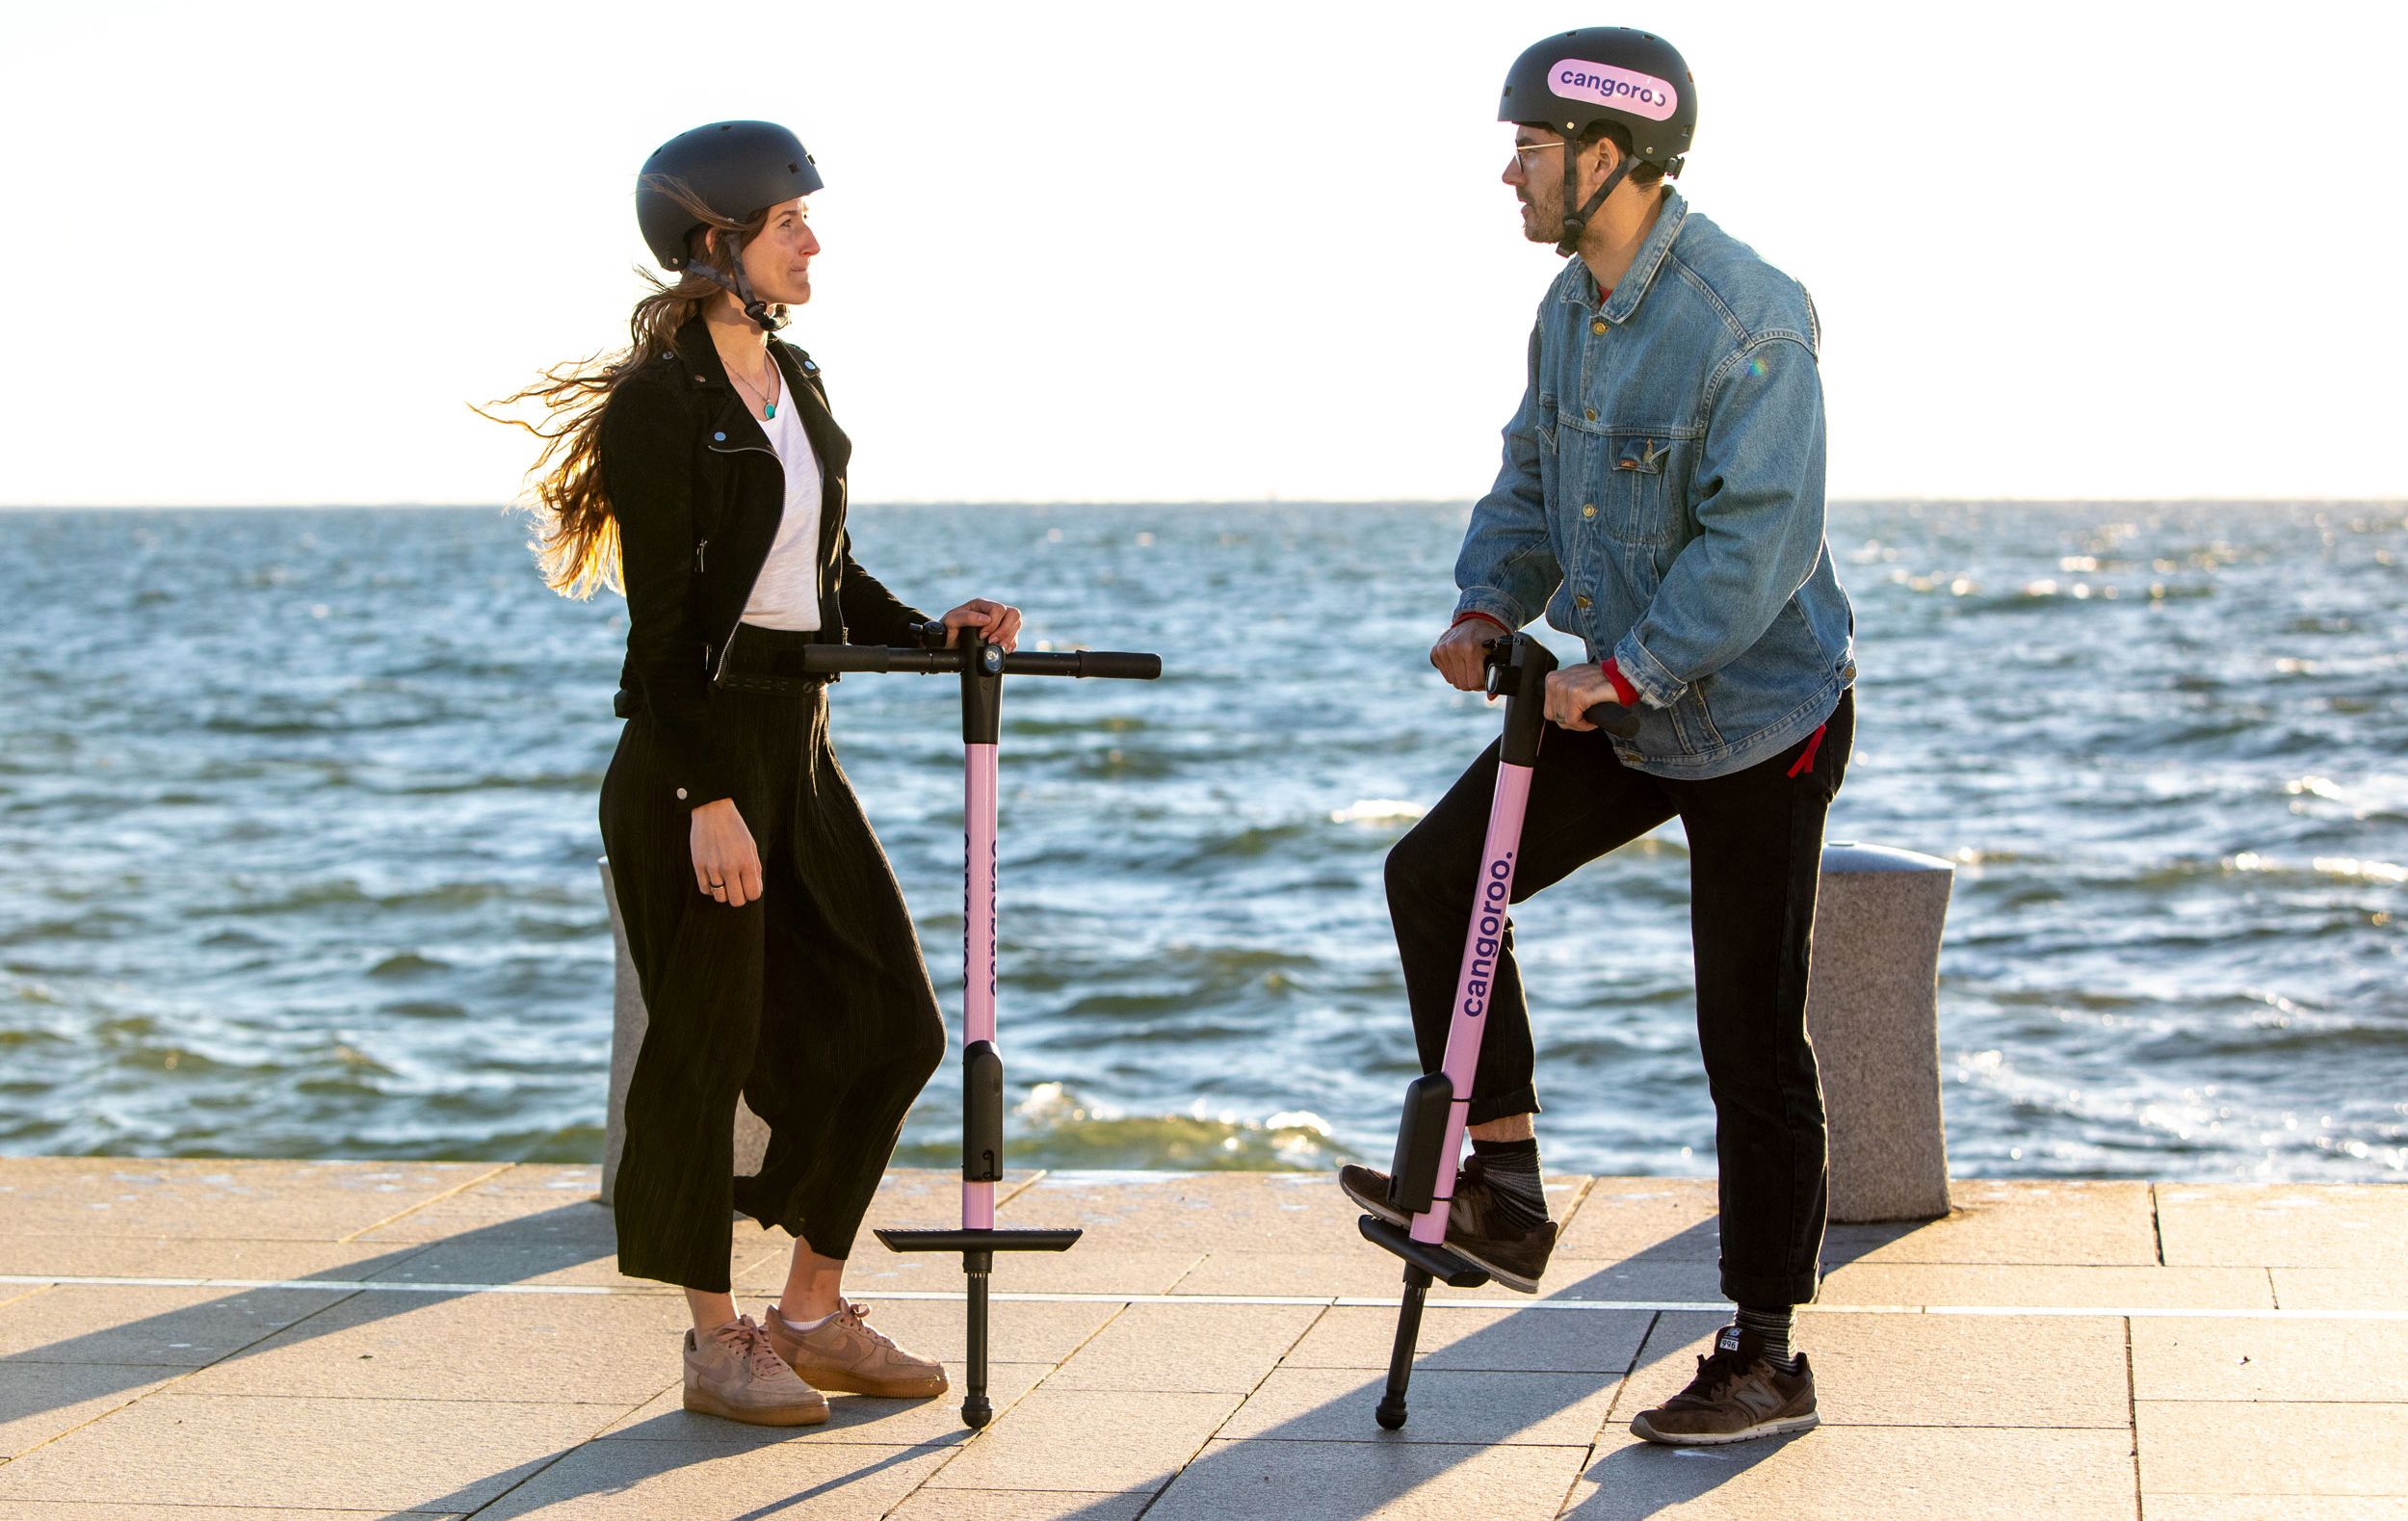 Is this pogo stick rental app for real? Does it even matter?